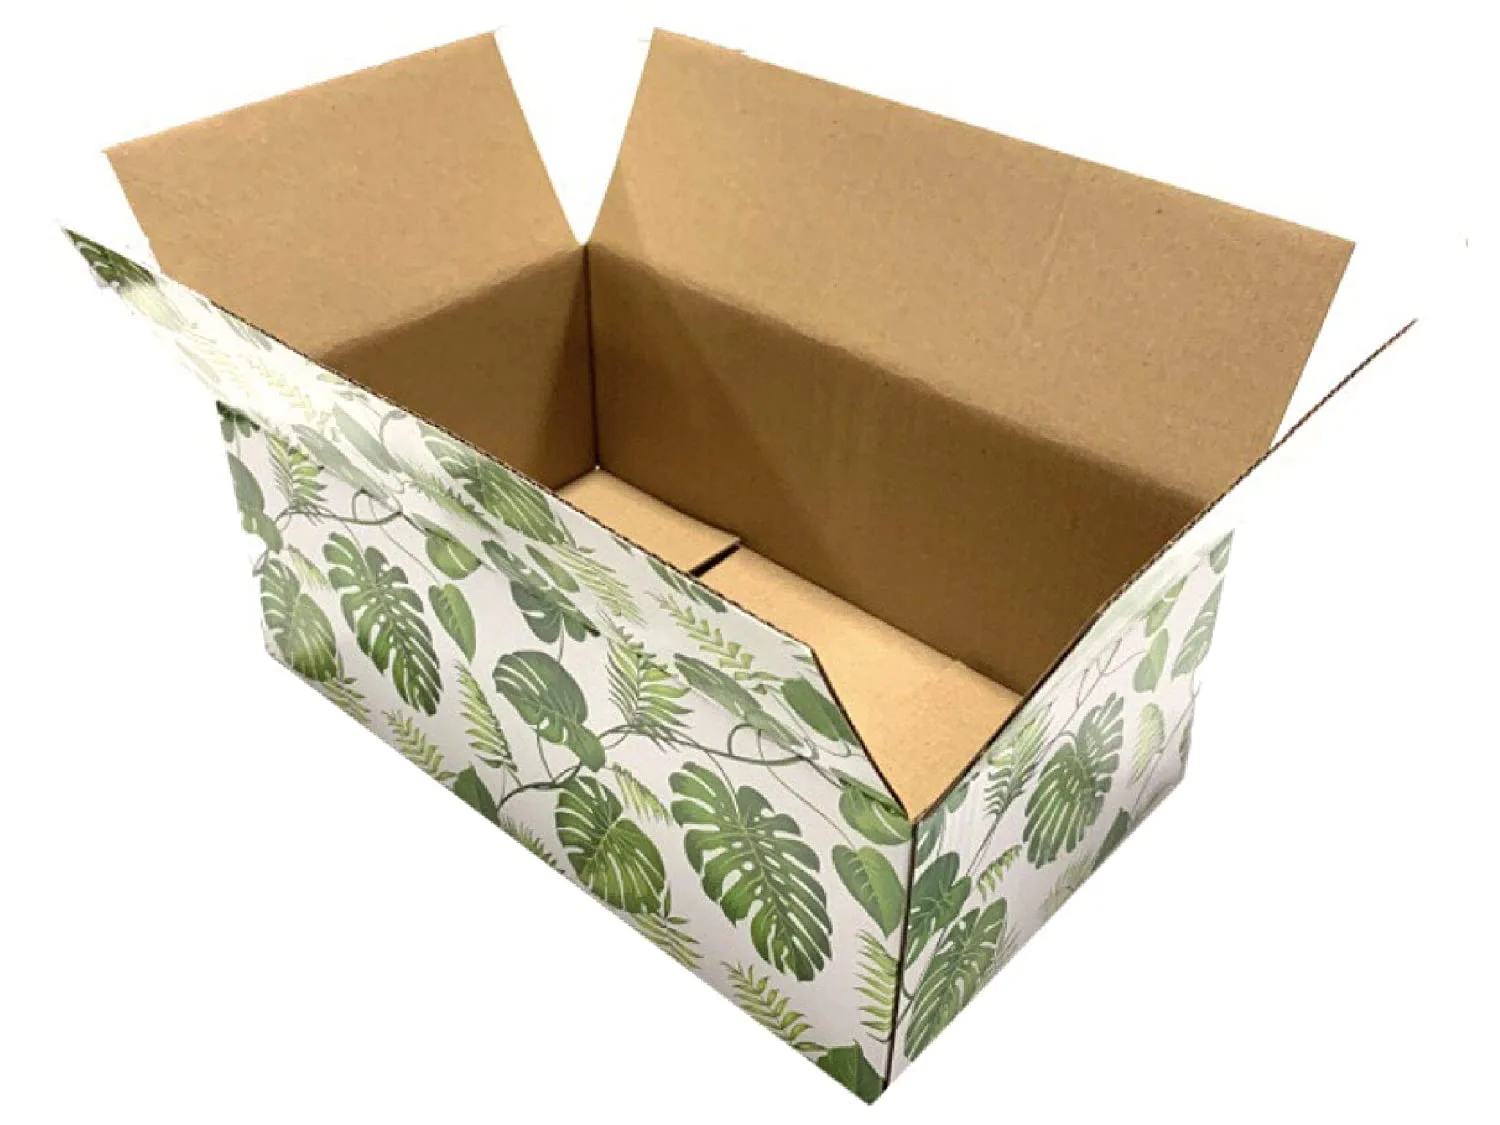 Boxes With Custom Printed Materials